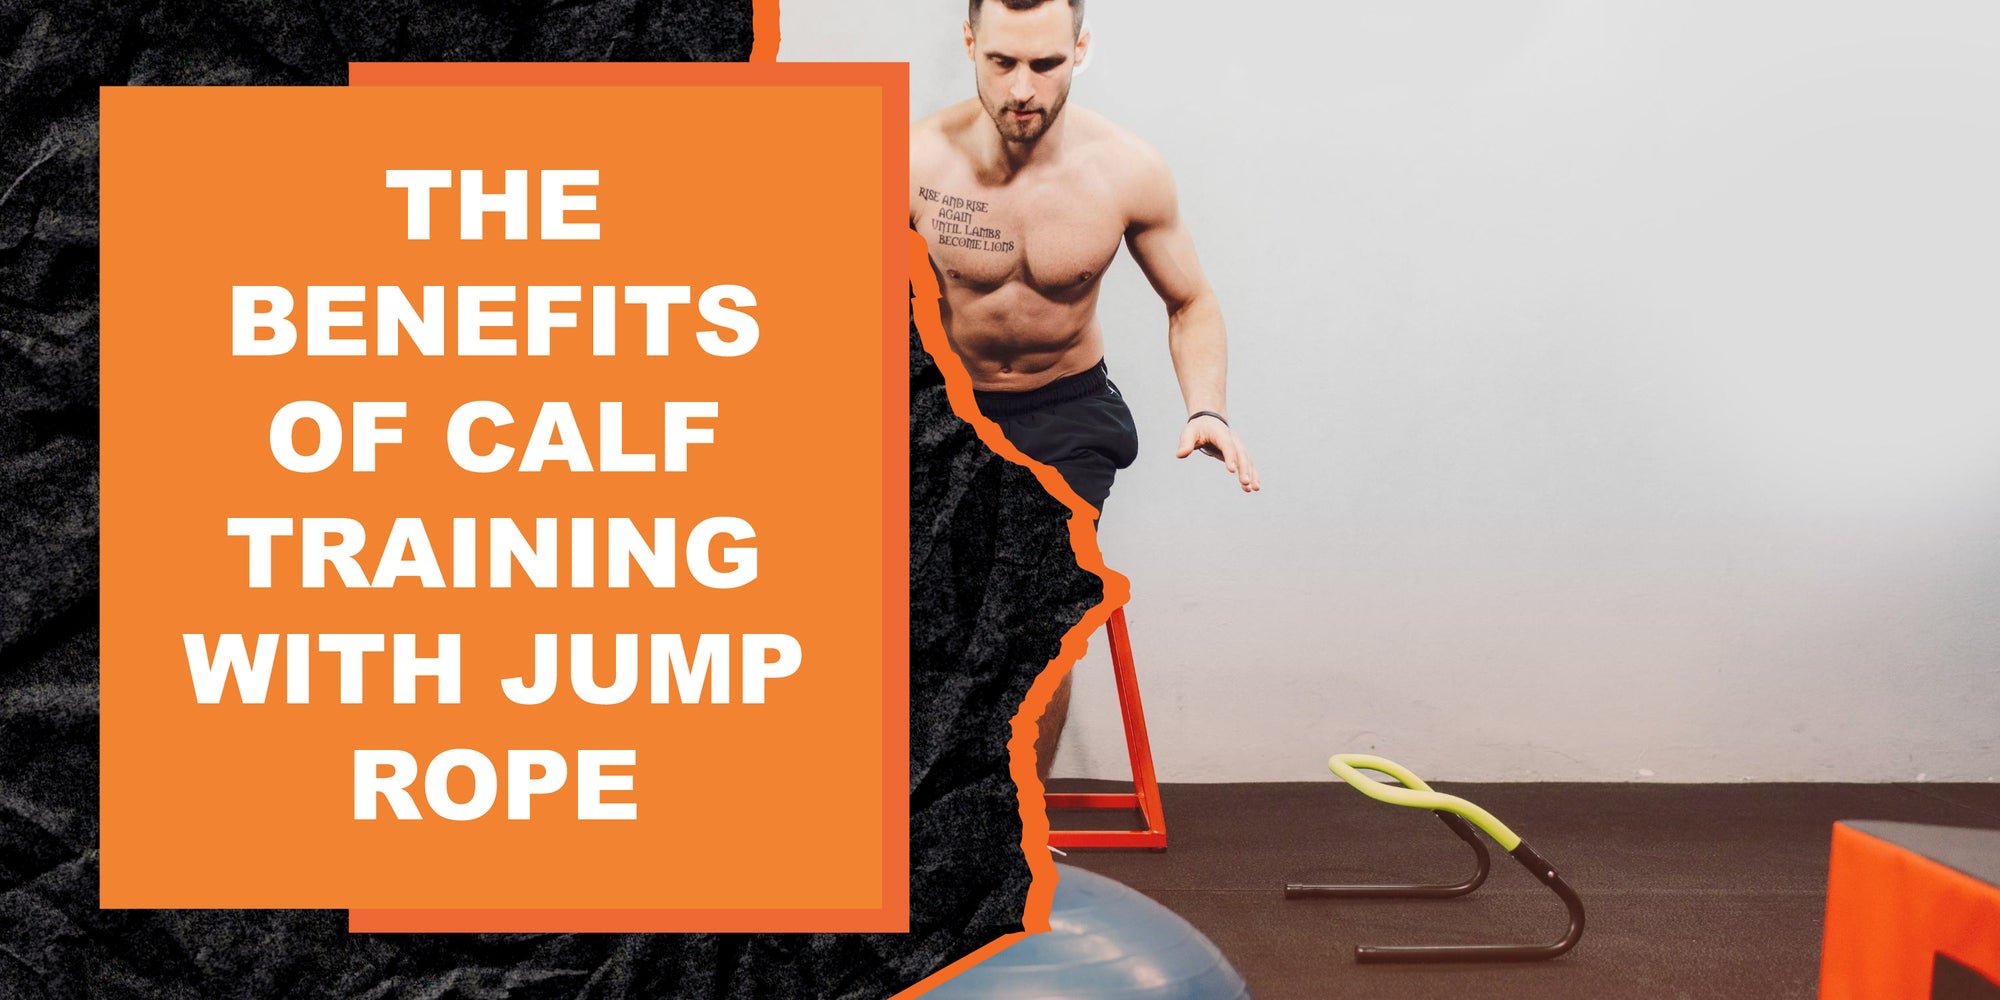 The Benefits of Calf Training with Jump Rope